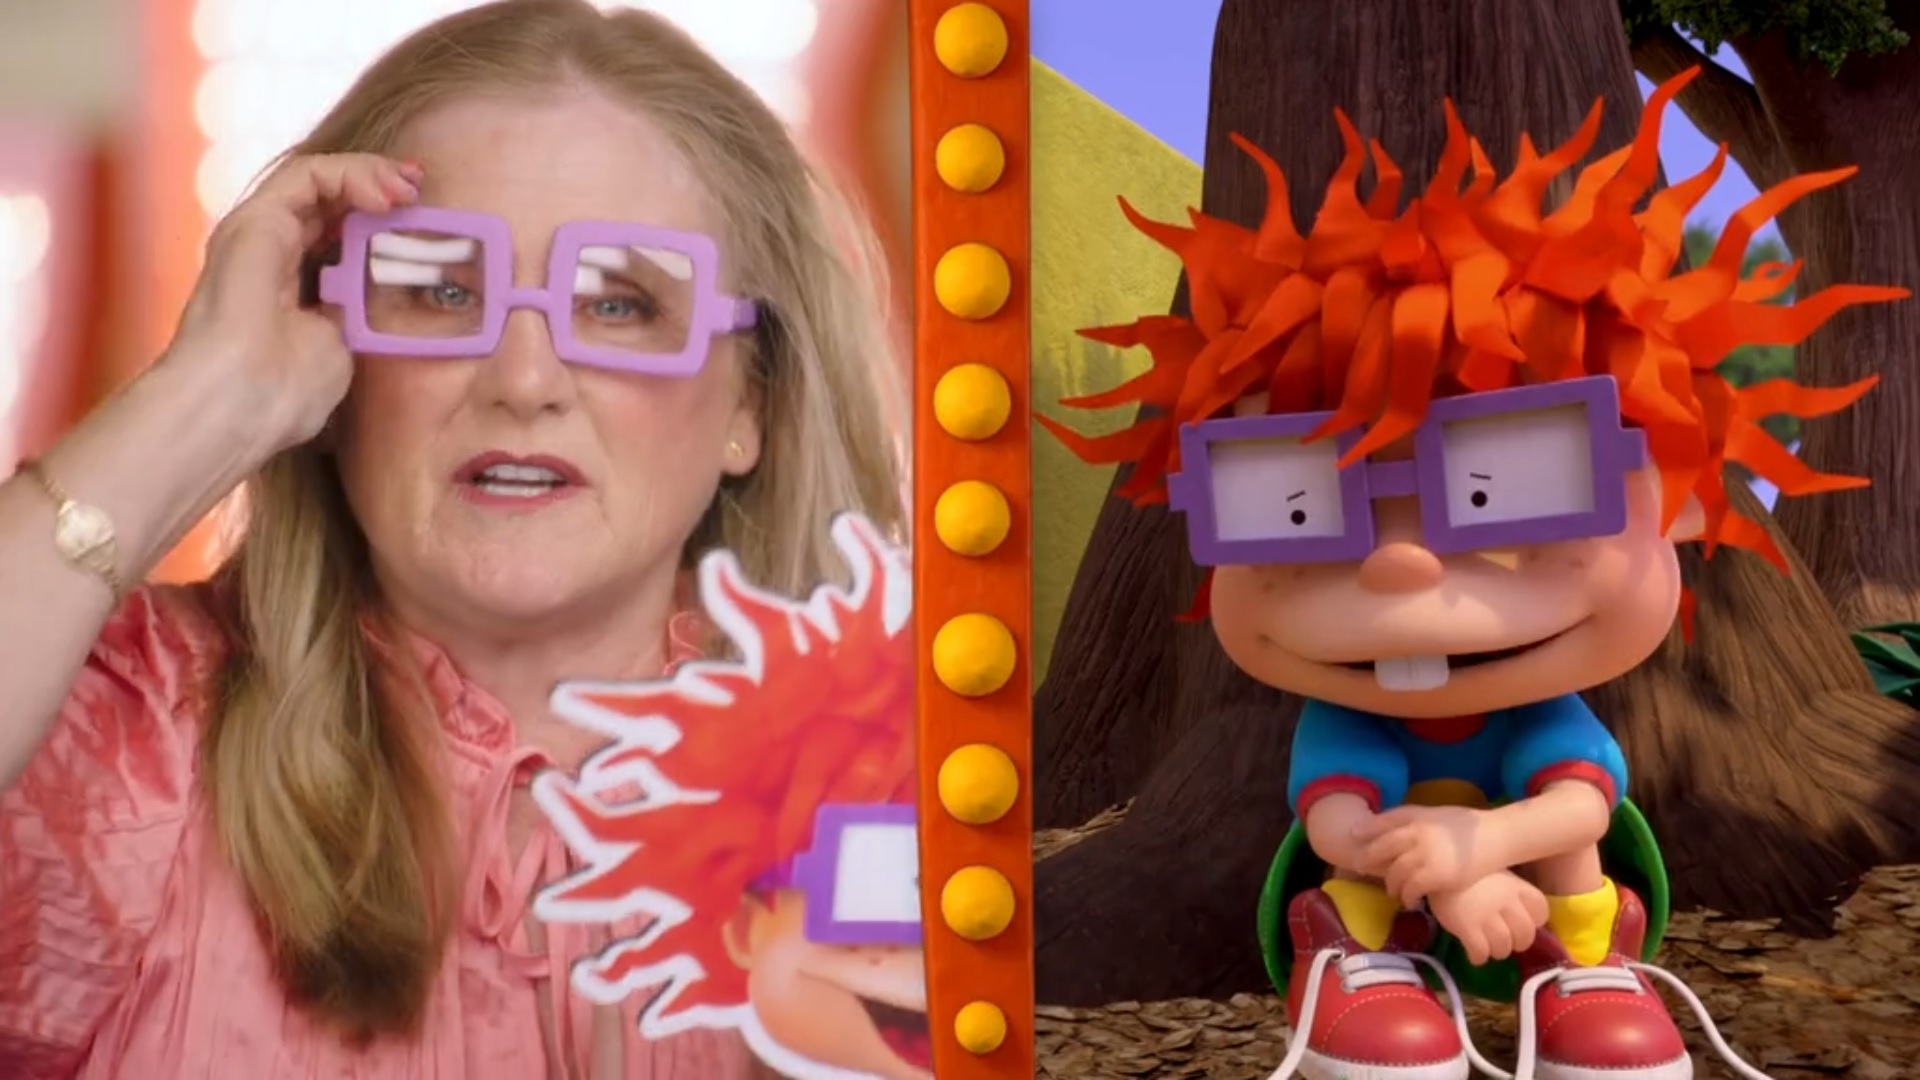 Nancy Cartwright Talks Rugrats and Offers Masterclass in Voice Acting [Exclusive Interview]